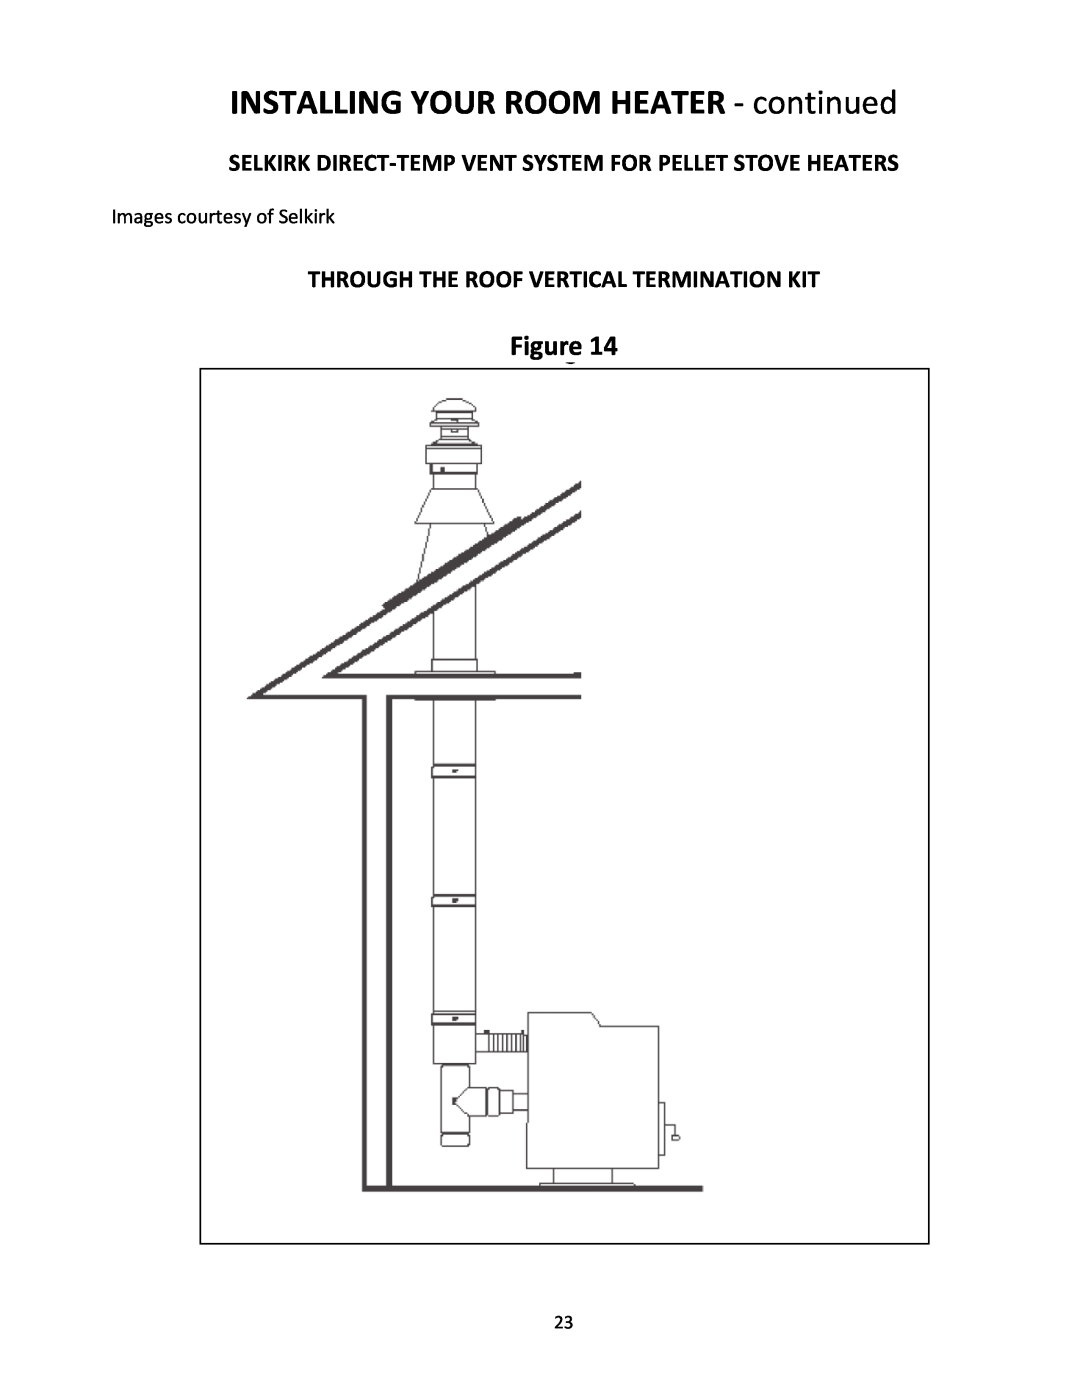 United States Stove 5660(I) manual Through The Roof Vertical Termination Kit, INSTALLING YOUR ROOM HEATER ‐ continued 